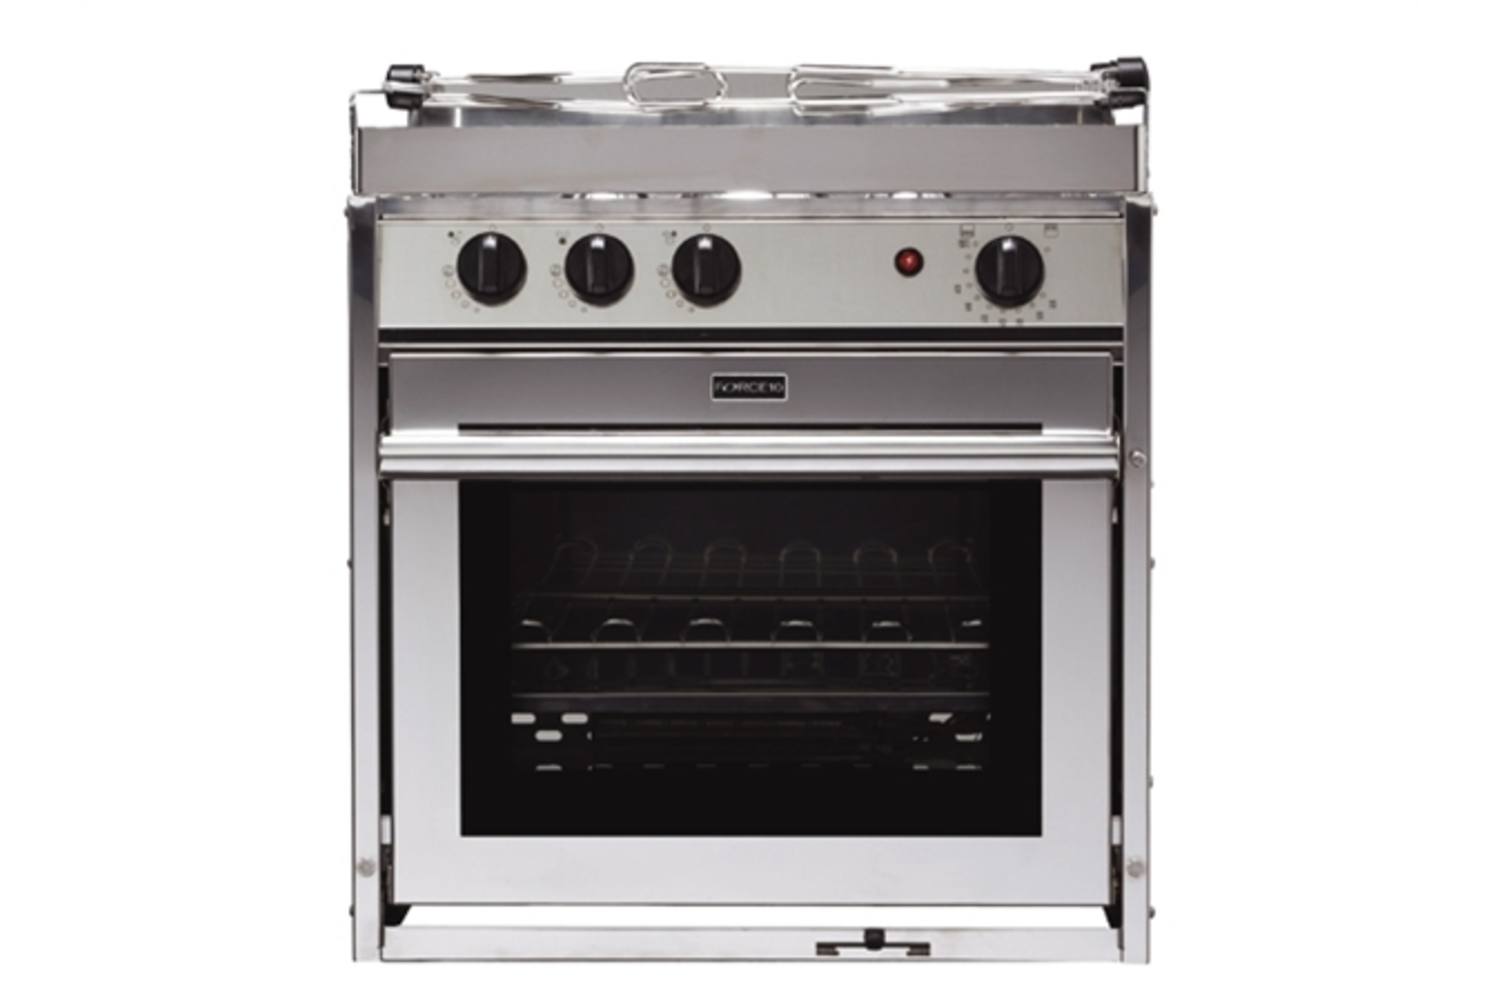 Force 10 euro compact oven/gascomfoor 3-pits